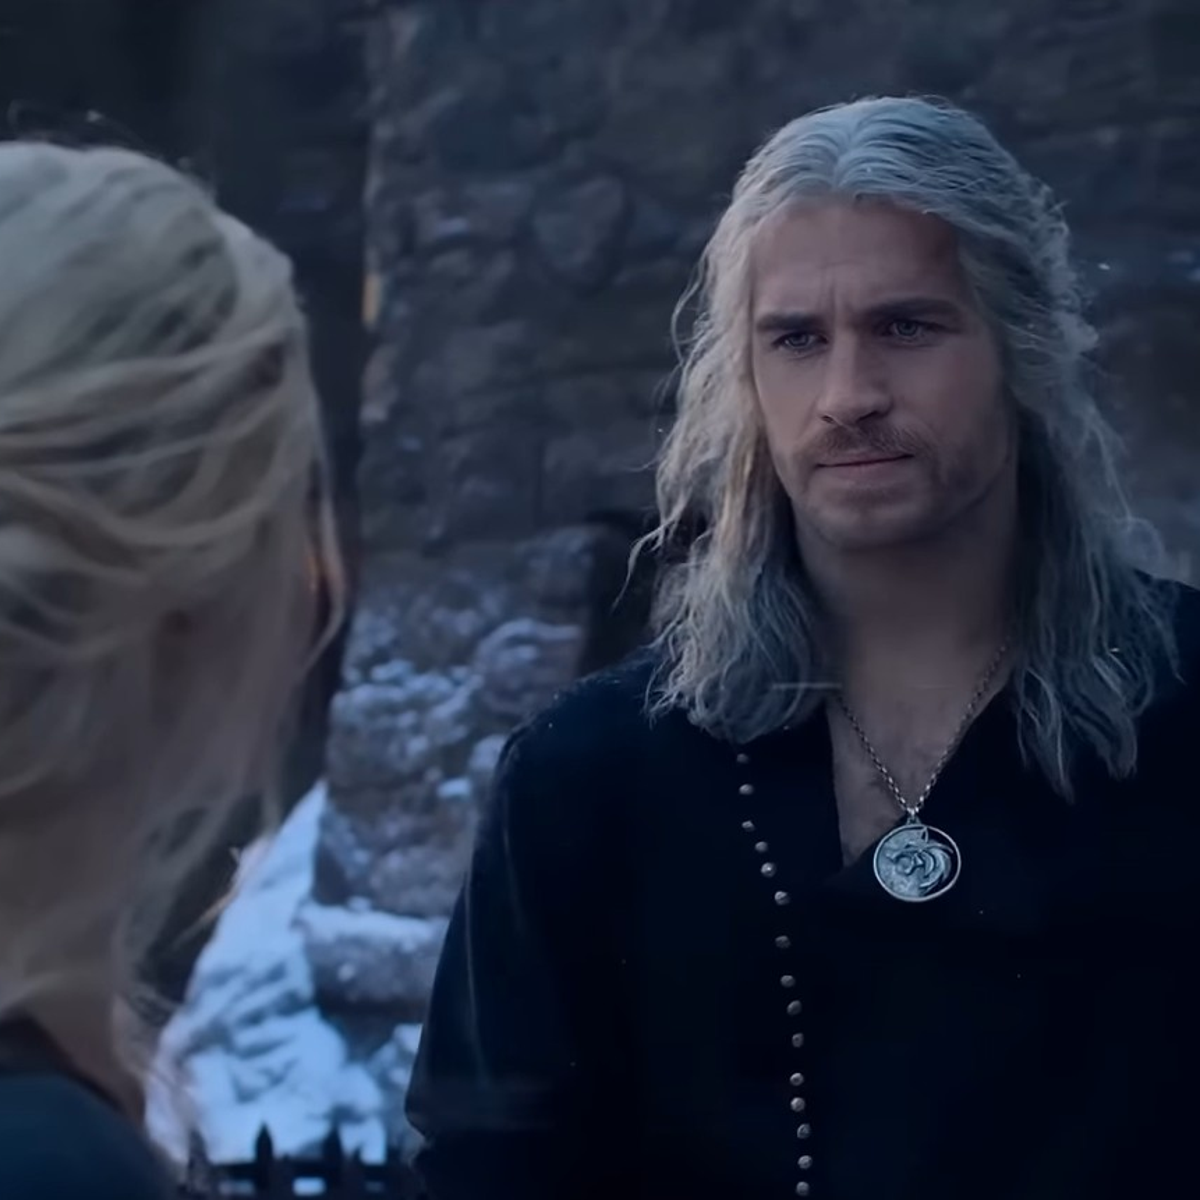 Liam Hemsworth Will Replace Henry Cavill In The Witcher Season 4